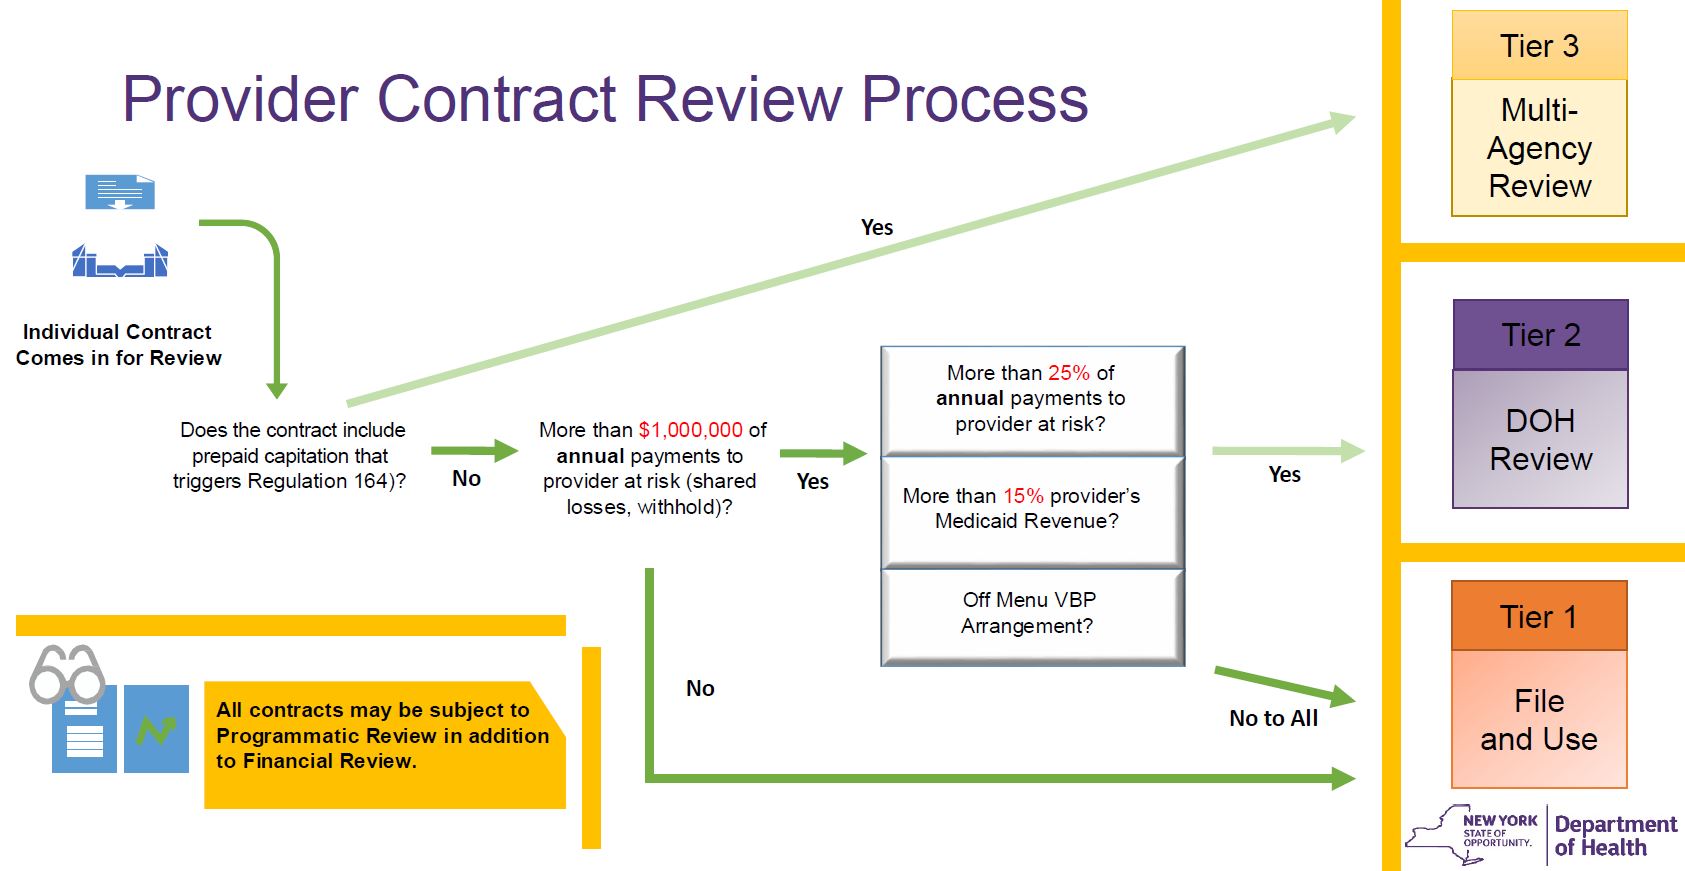 Provider Contract Review Process